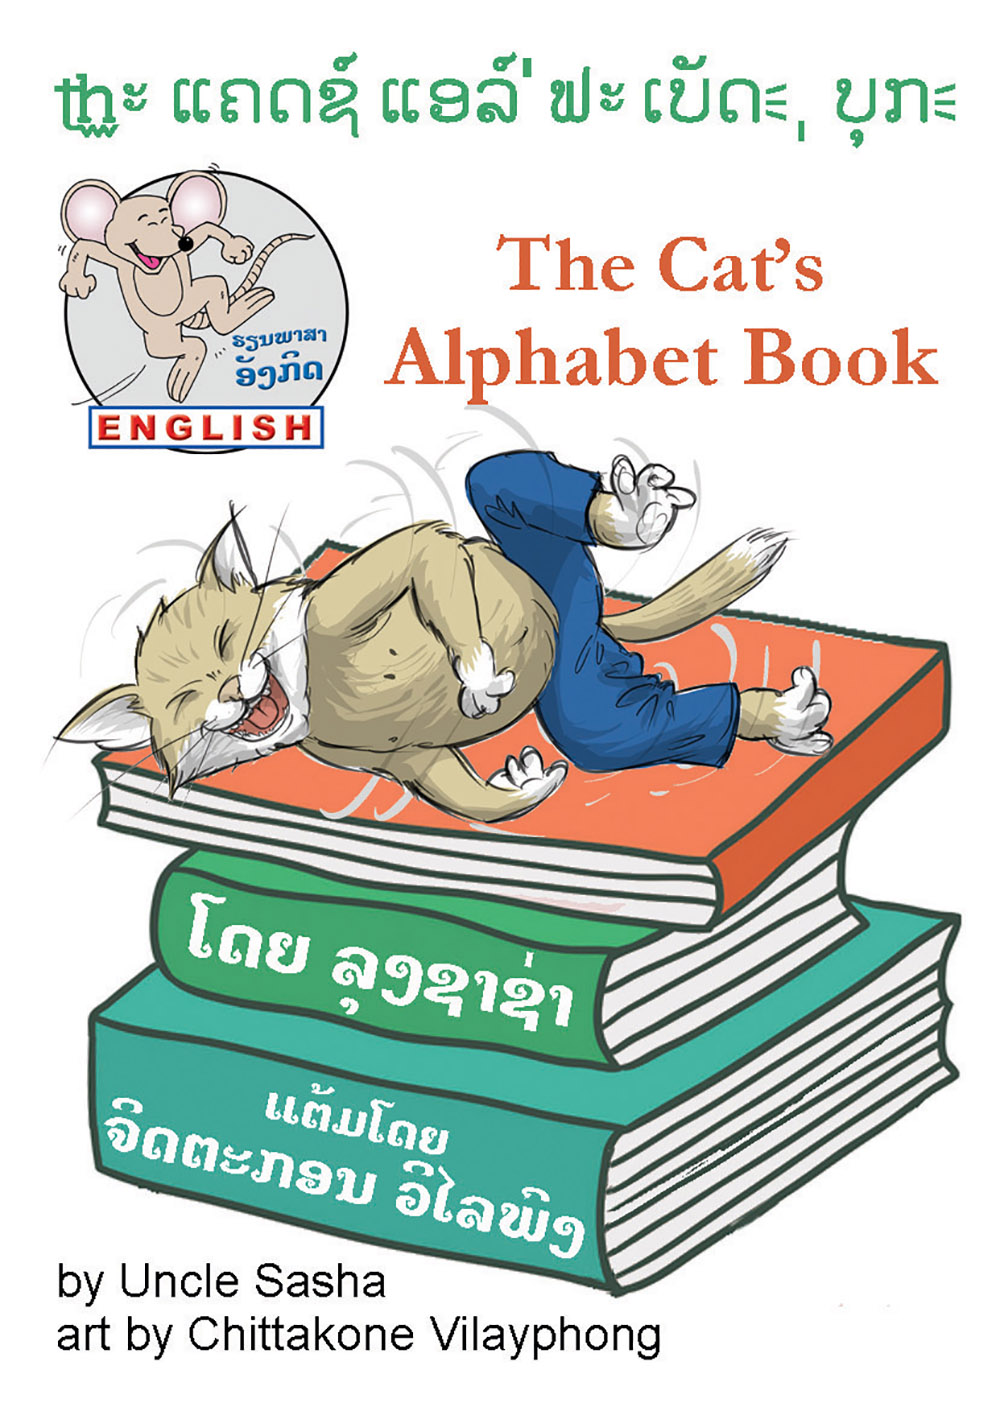 The Cat's Alphabet Book large book cover, published in Lao language